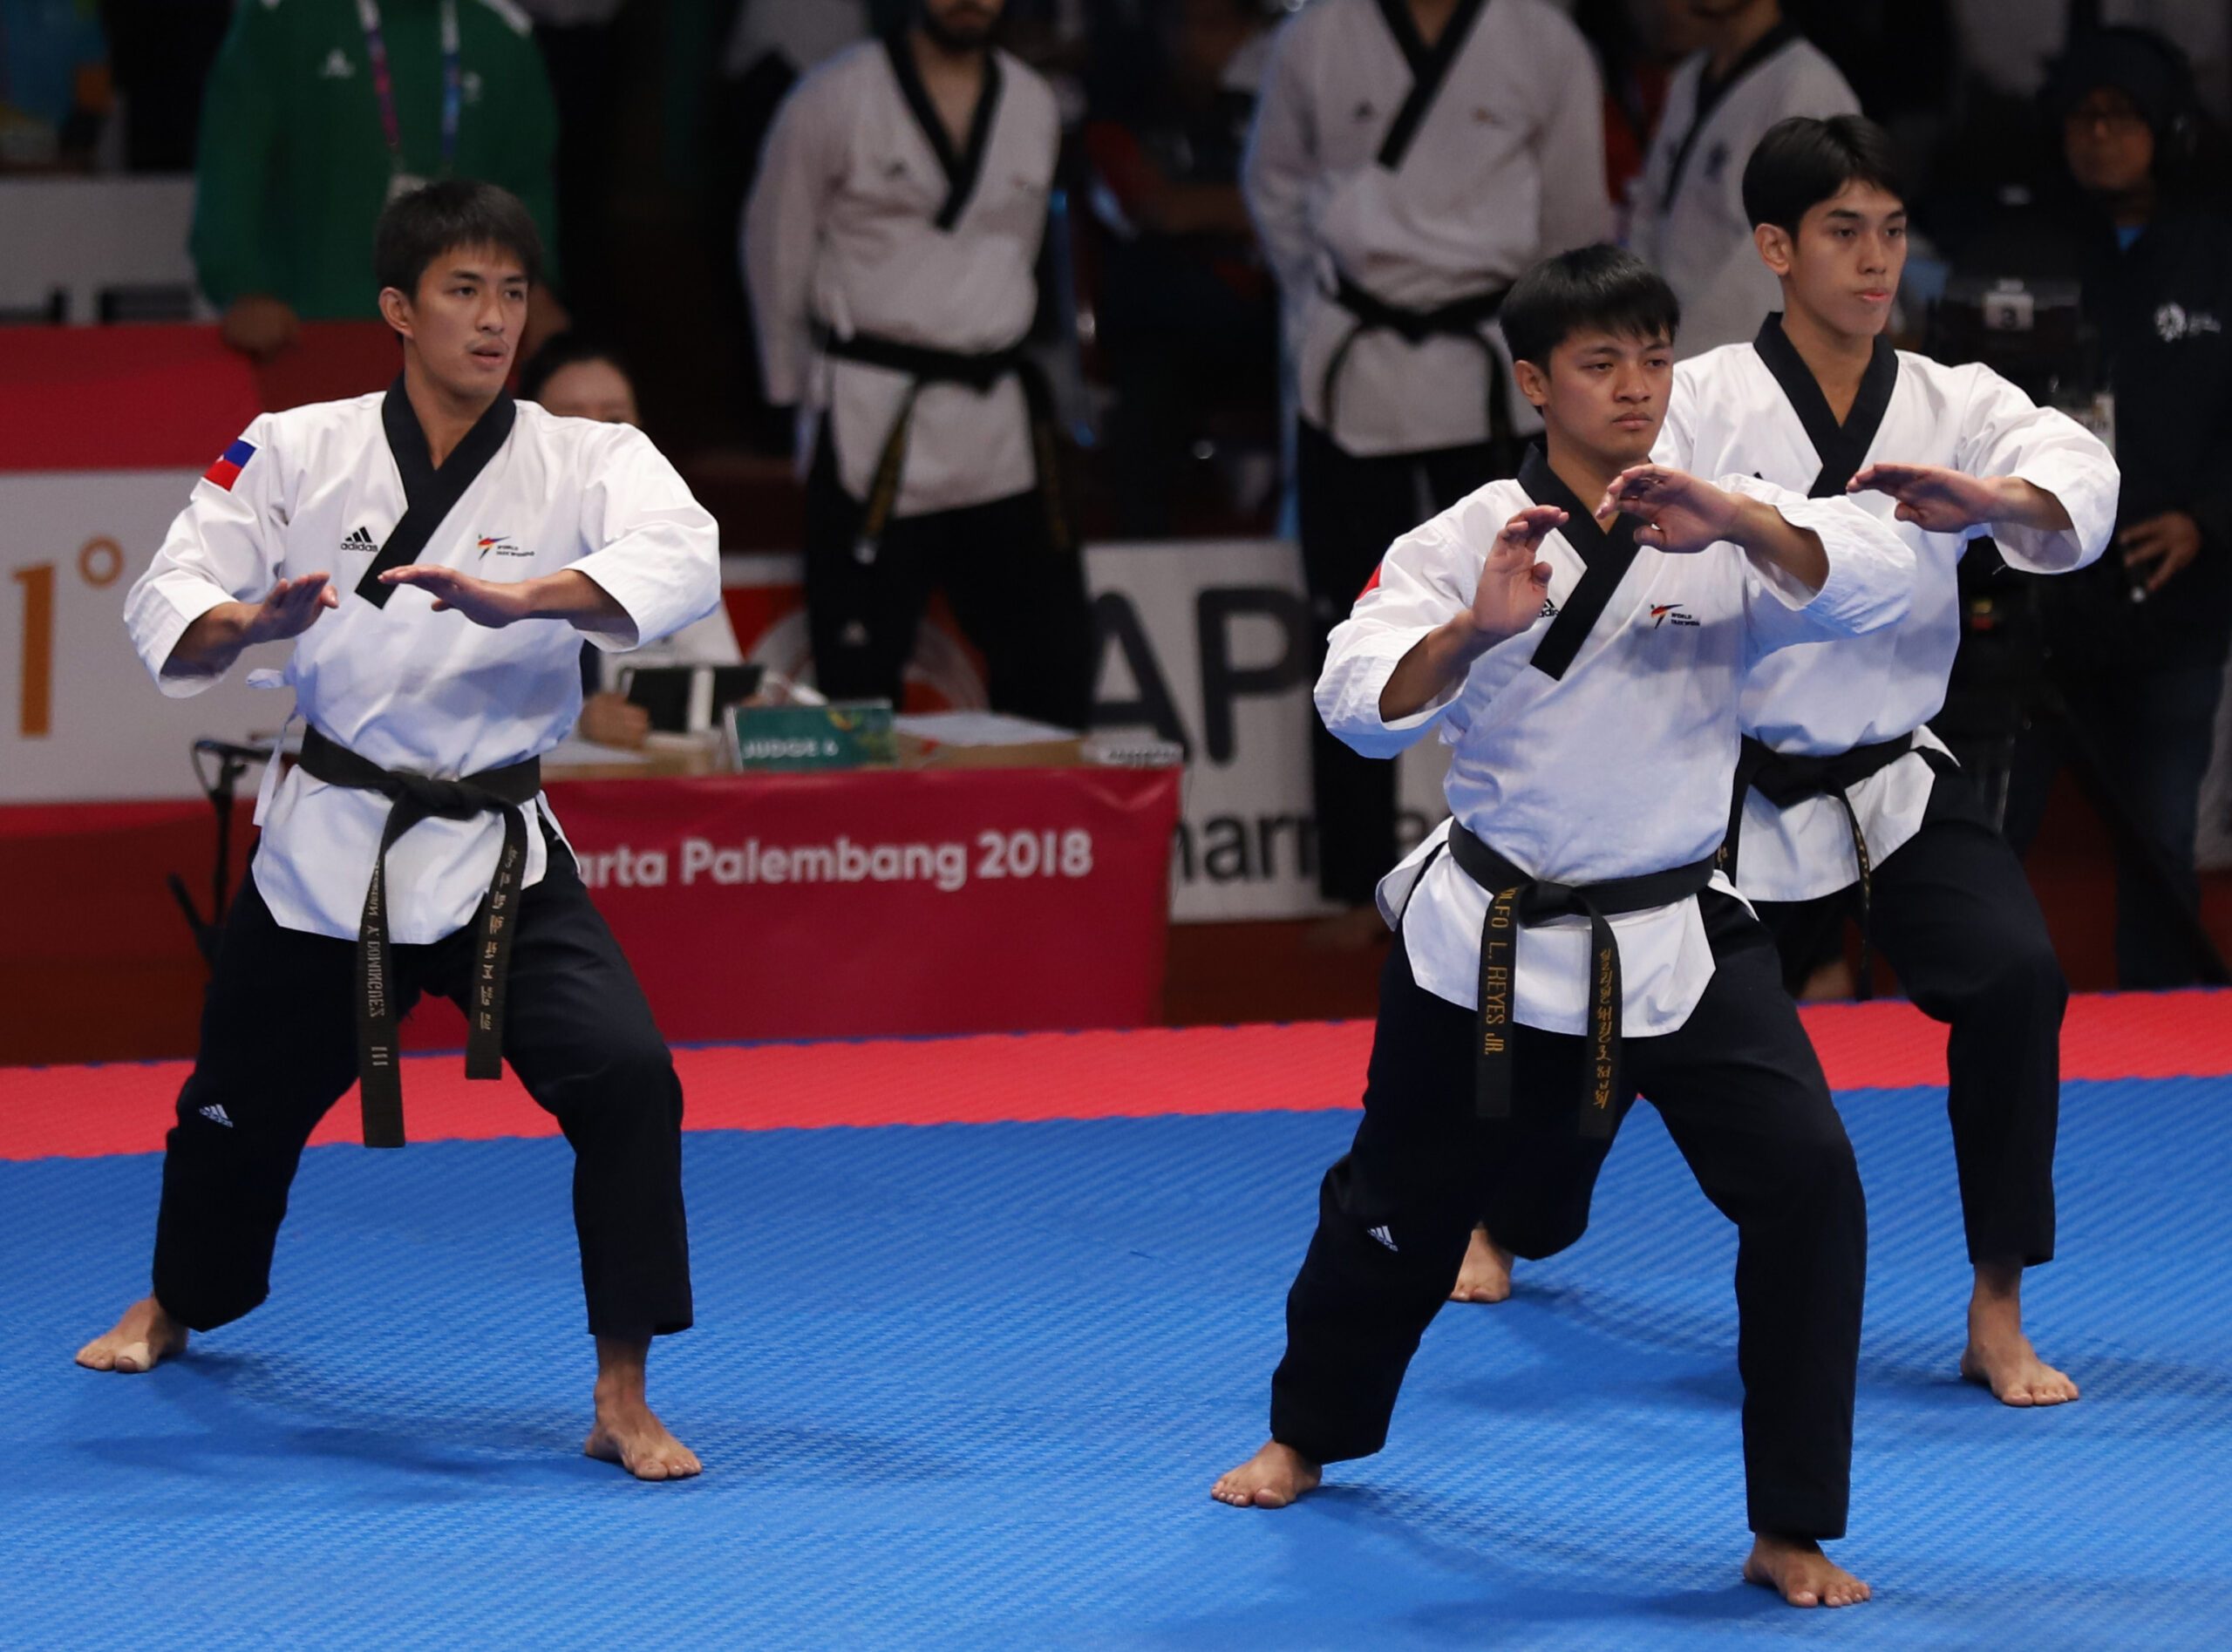 Men’s poomsae team gives PH first medal in 2018 Asian Games